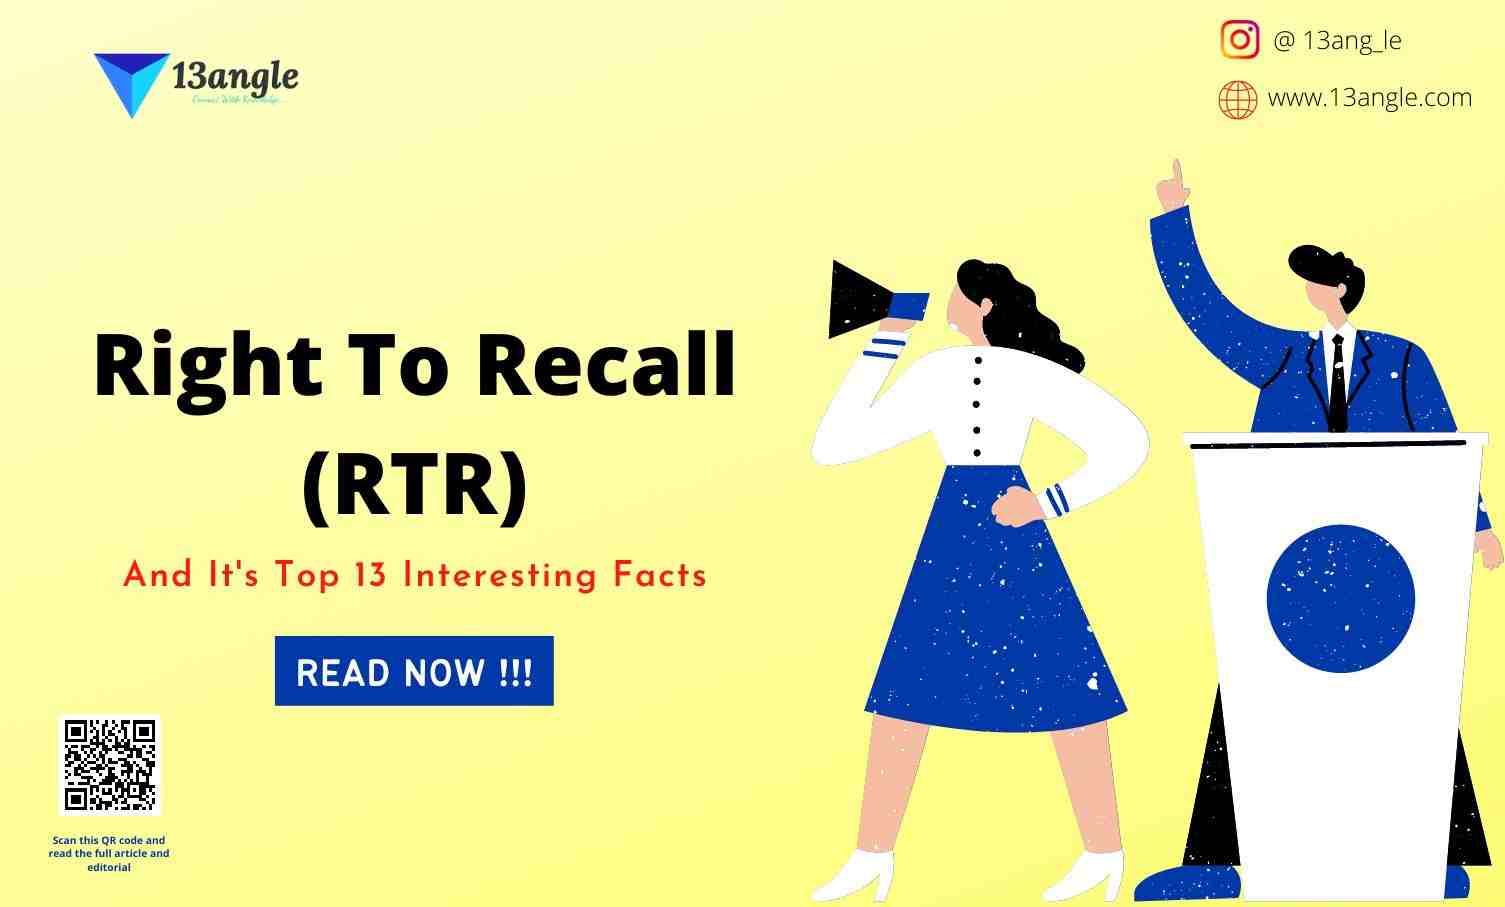 Right To Recall (RTR)- 13angle.com